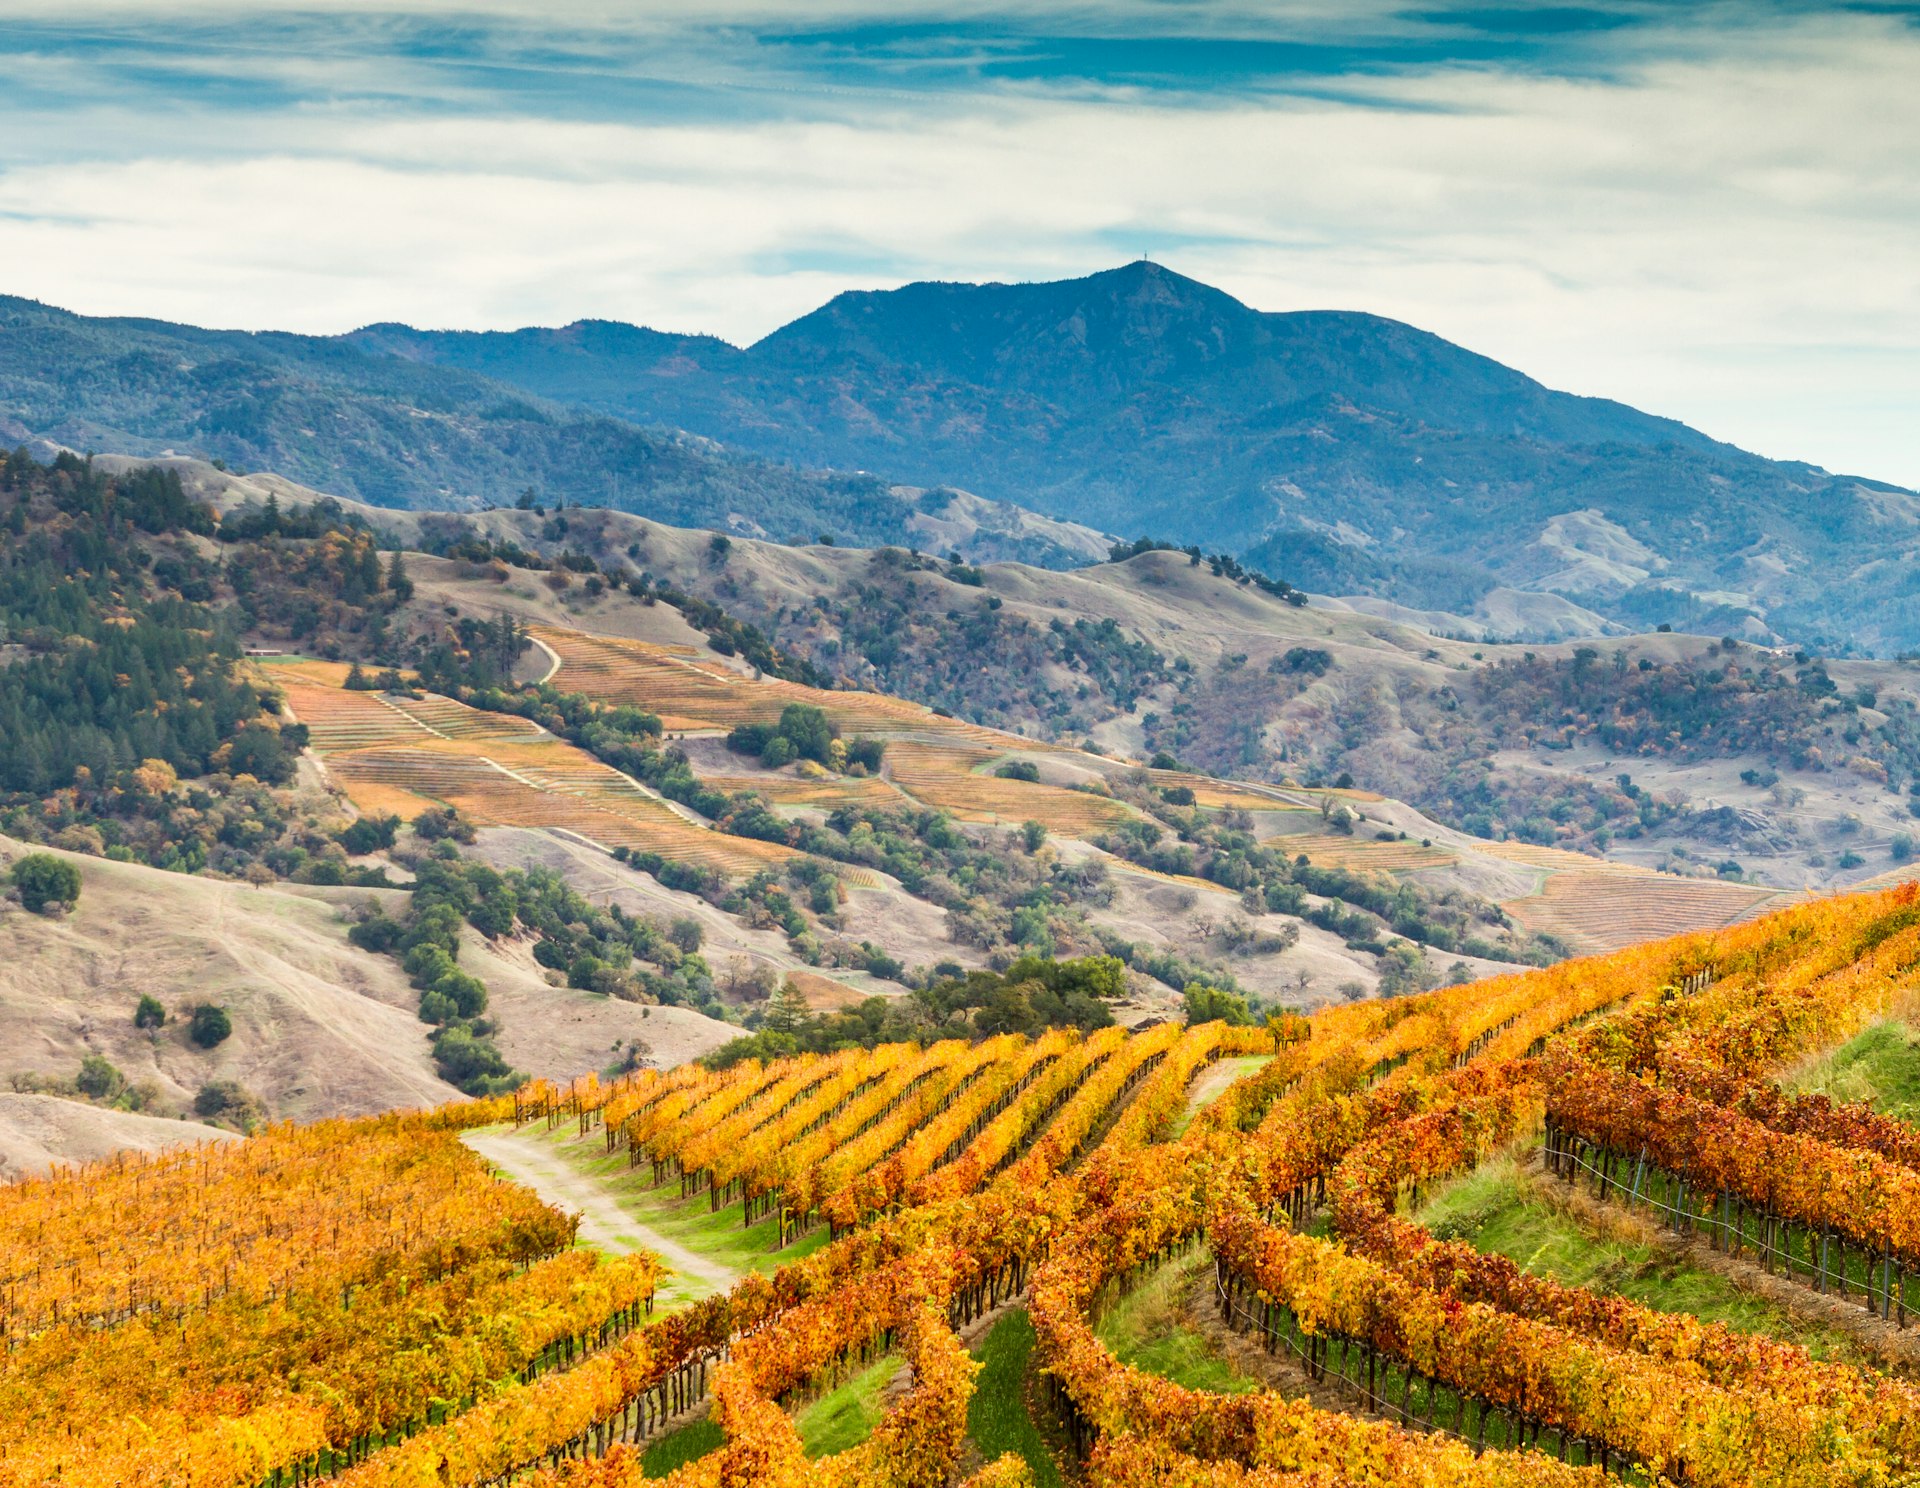 Amber vineyards paint the sides of a hillside with a mountain peak rising in the distance